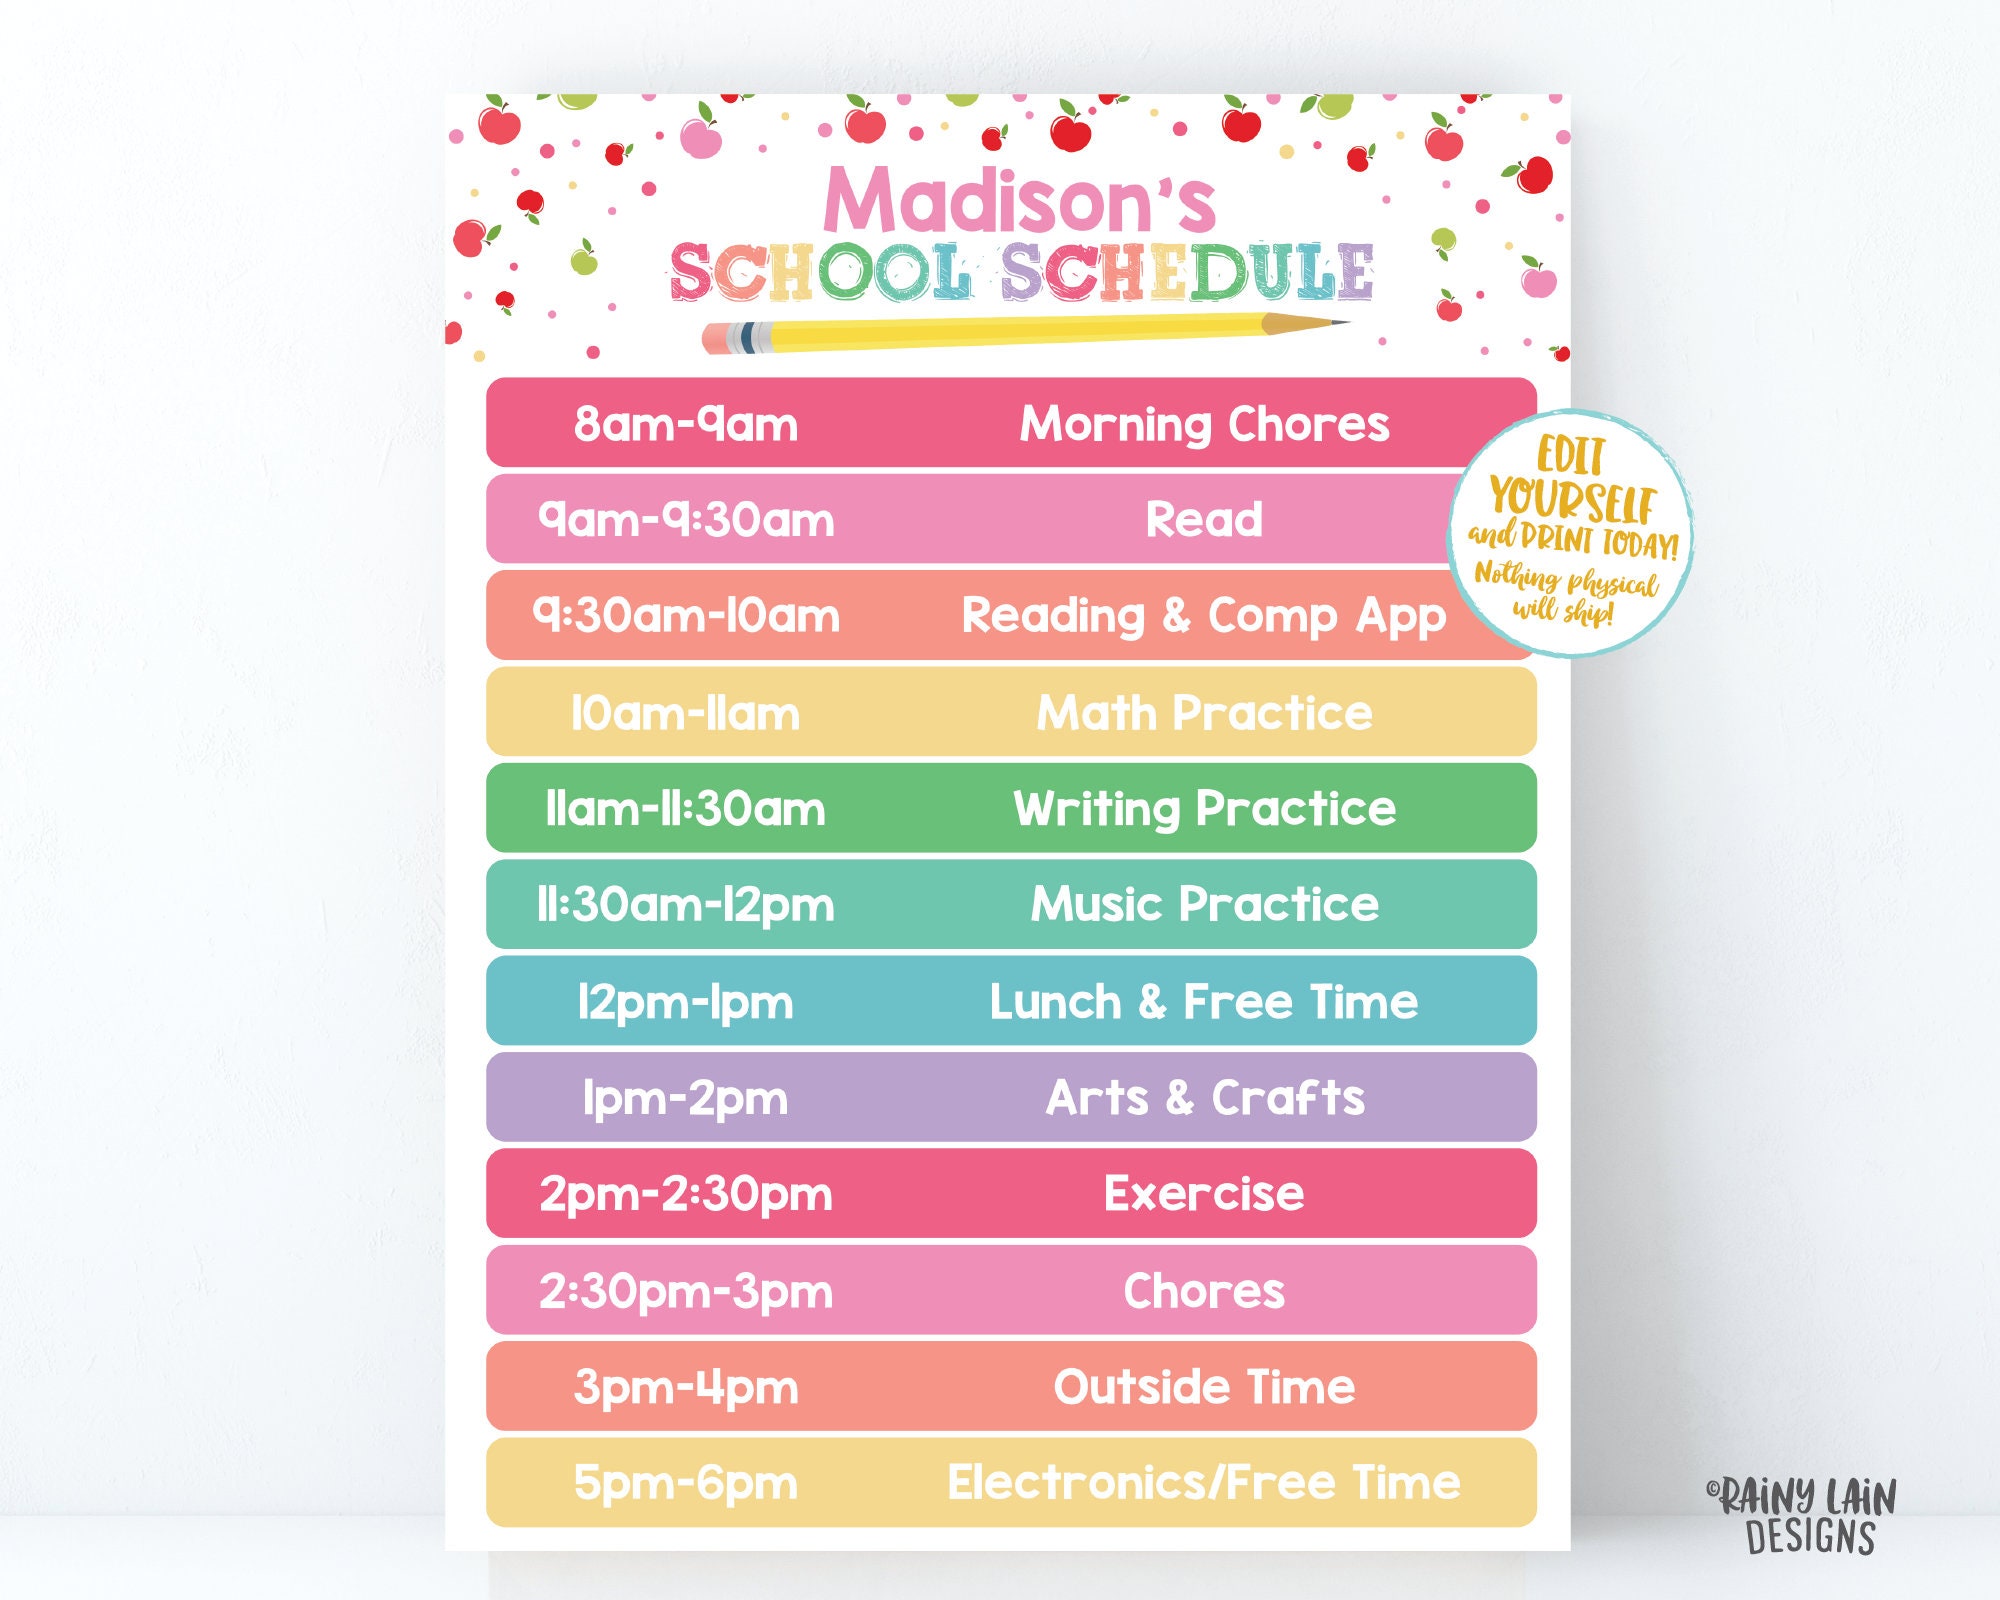 To Do List with Time Schedule ~ Editable Version